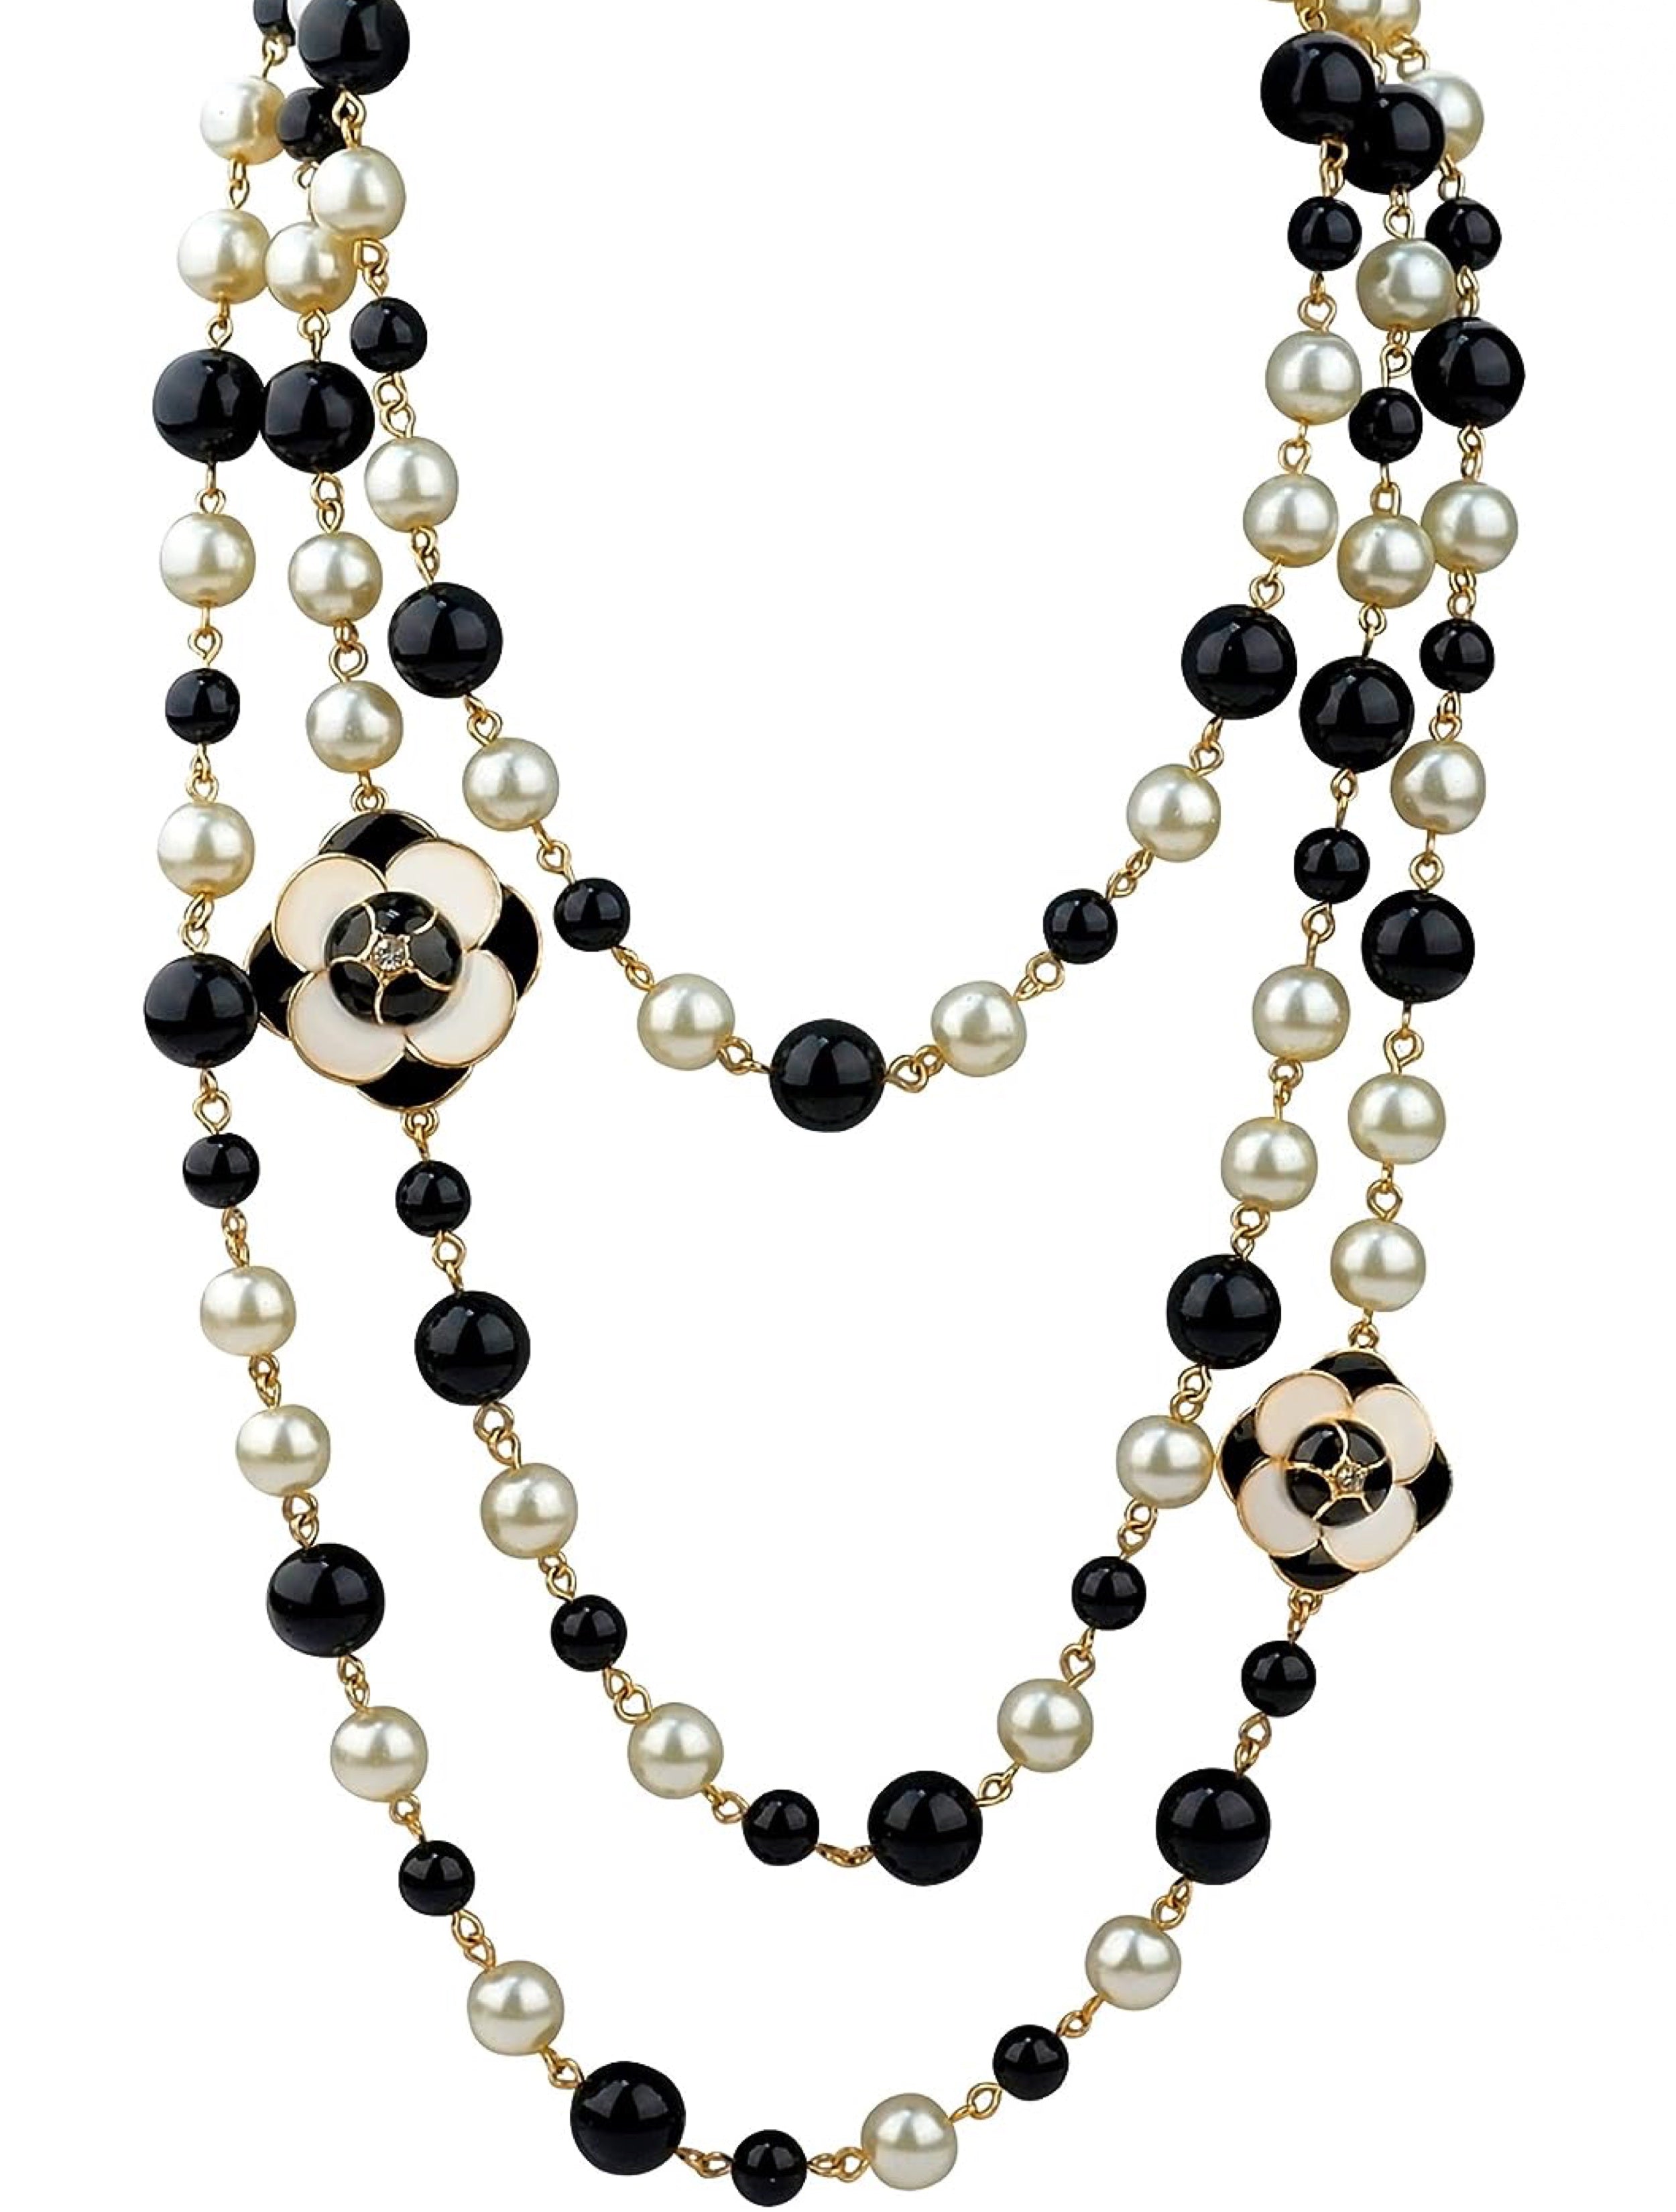 18K Gold Black & White Pearl Necklace